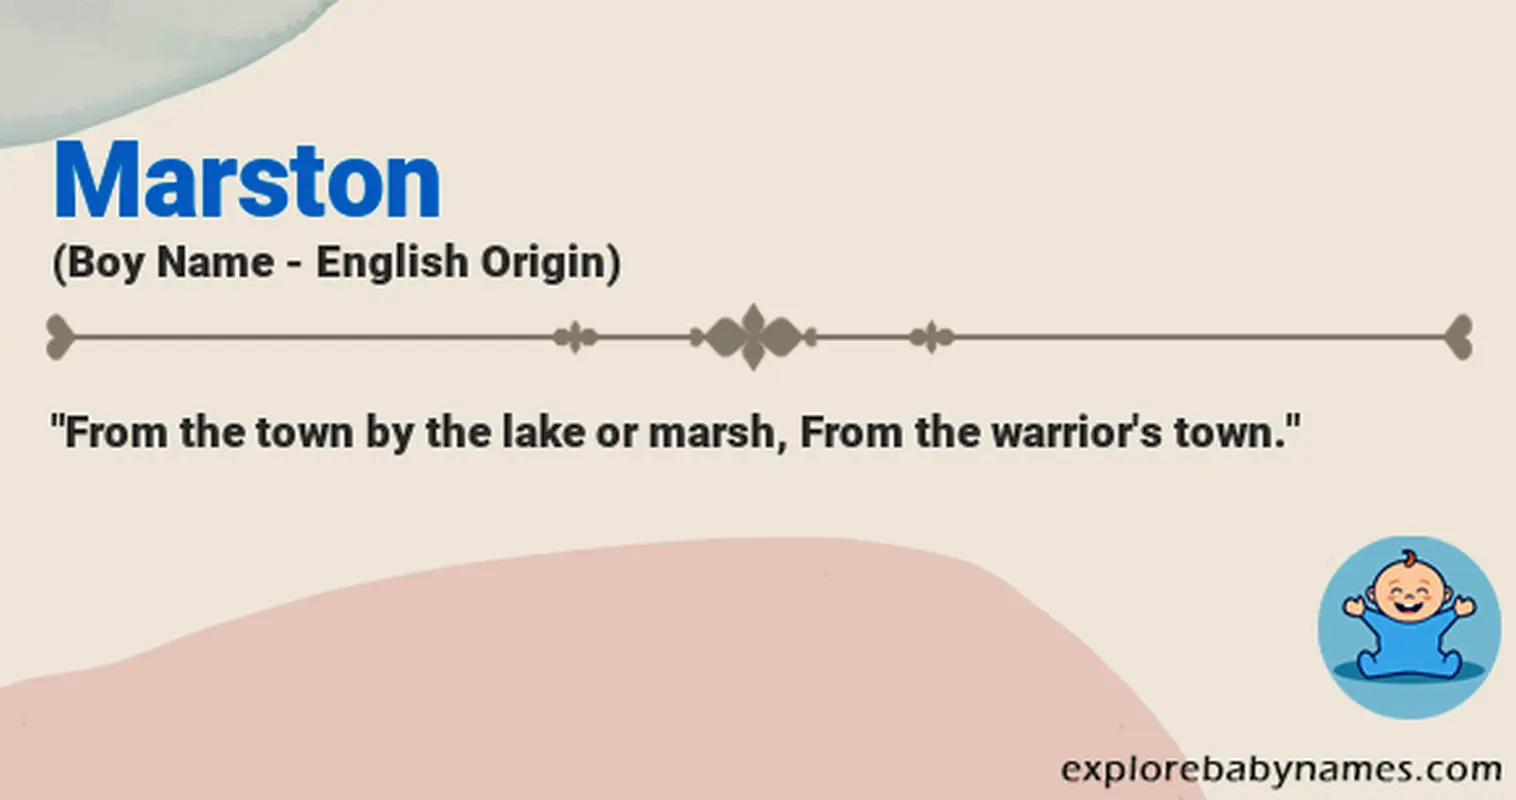 Meaning of Marston